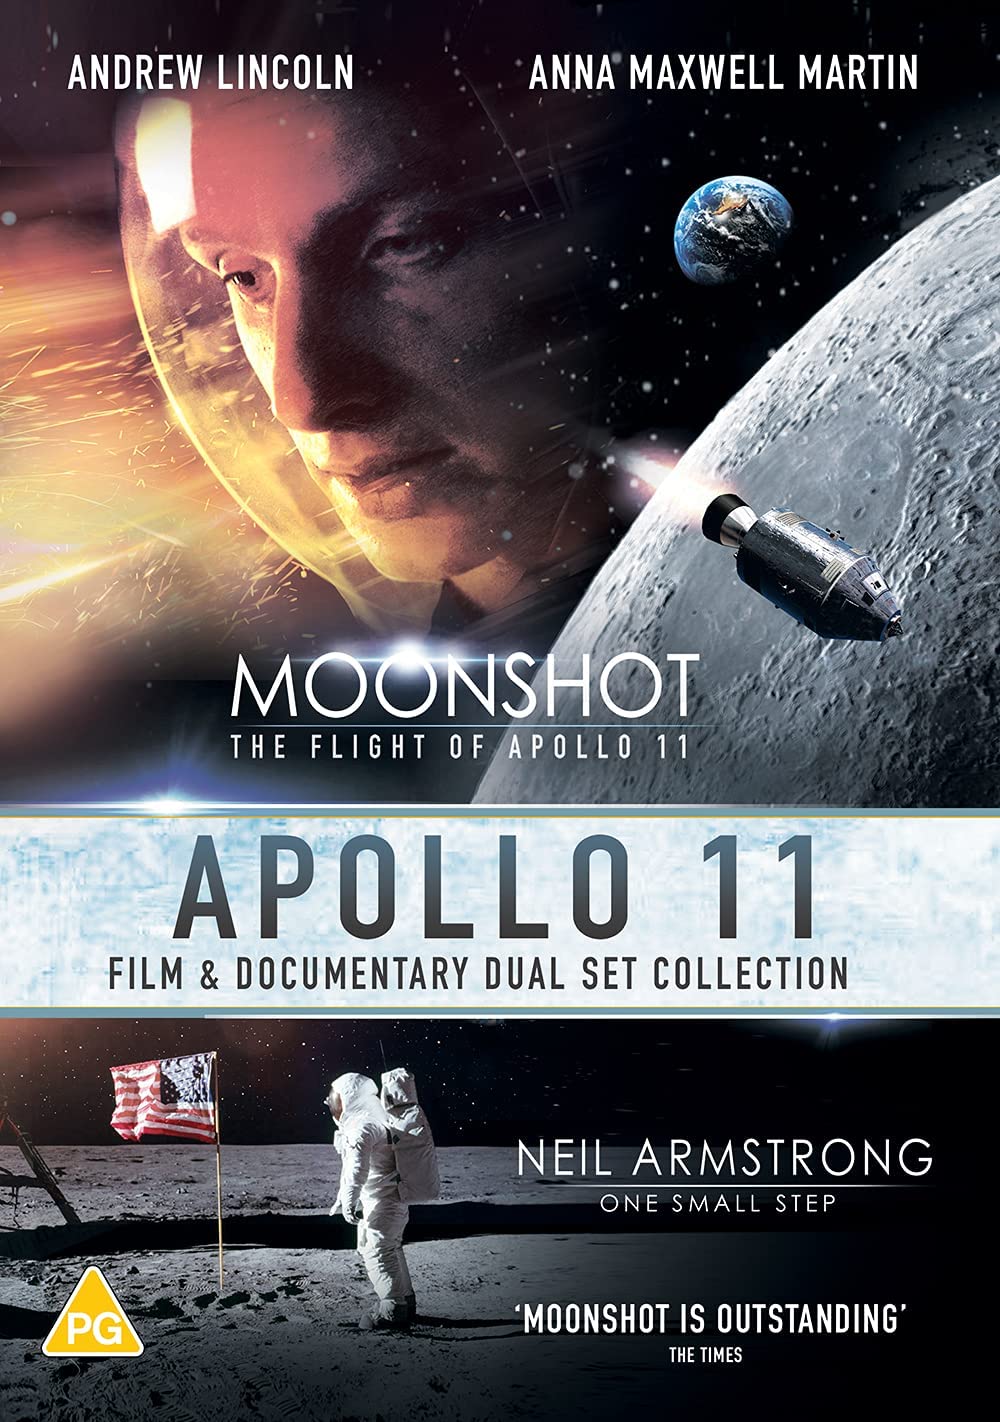 Apollo 11 - Dual Set Collection (Film - Moonshot the flight of Apollo 11 starring Andrew Lincoln plus additional documentary - Neil Armstrong 'One small step'.) - [DVD]